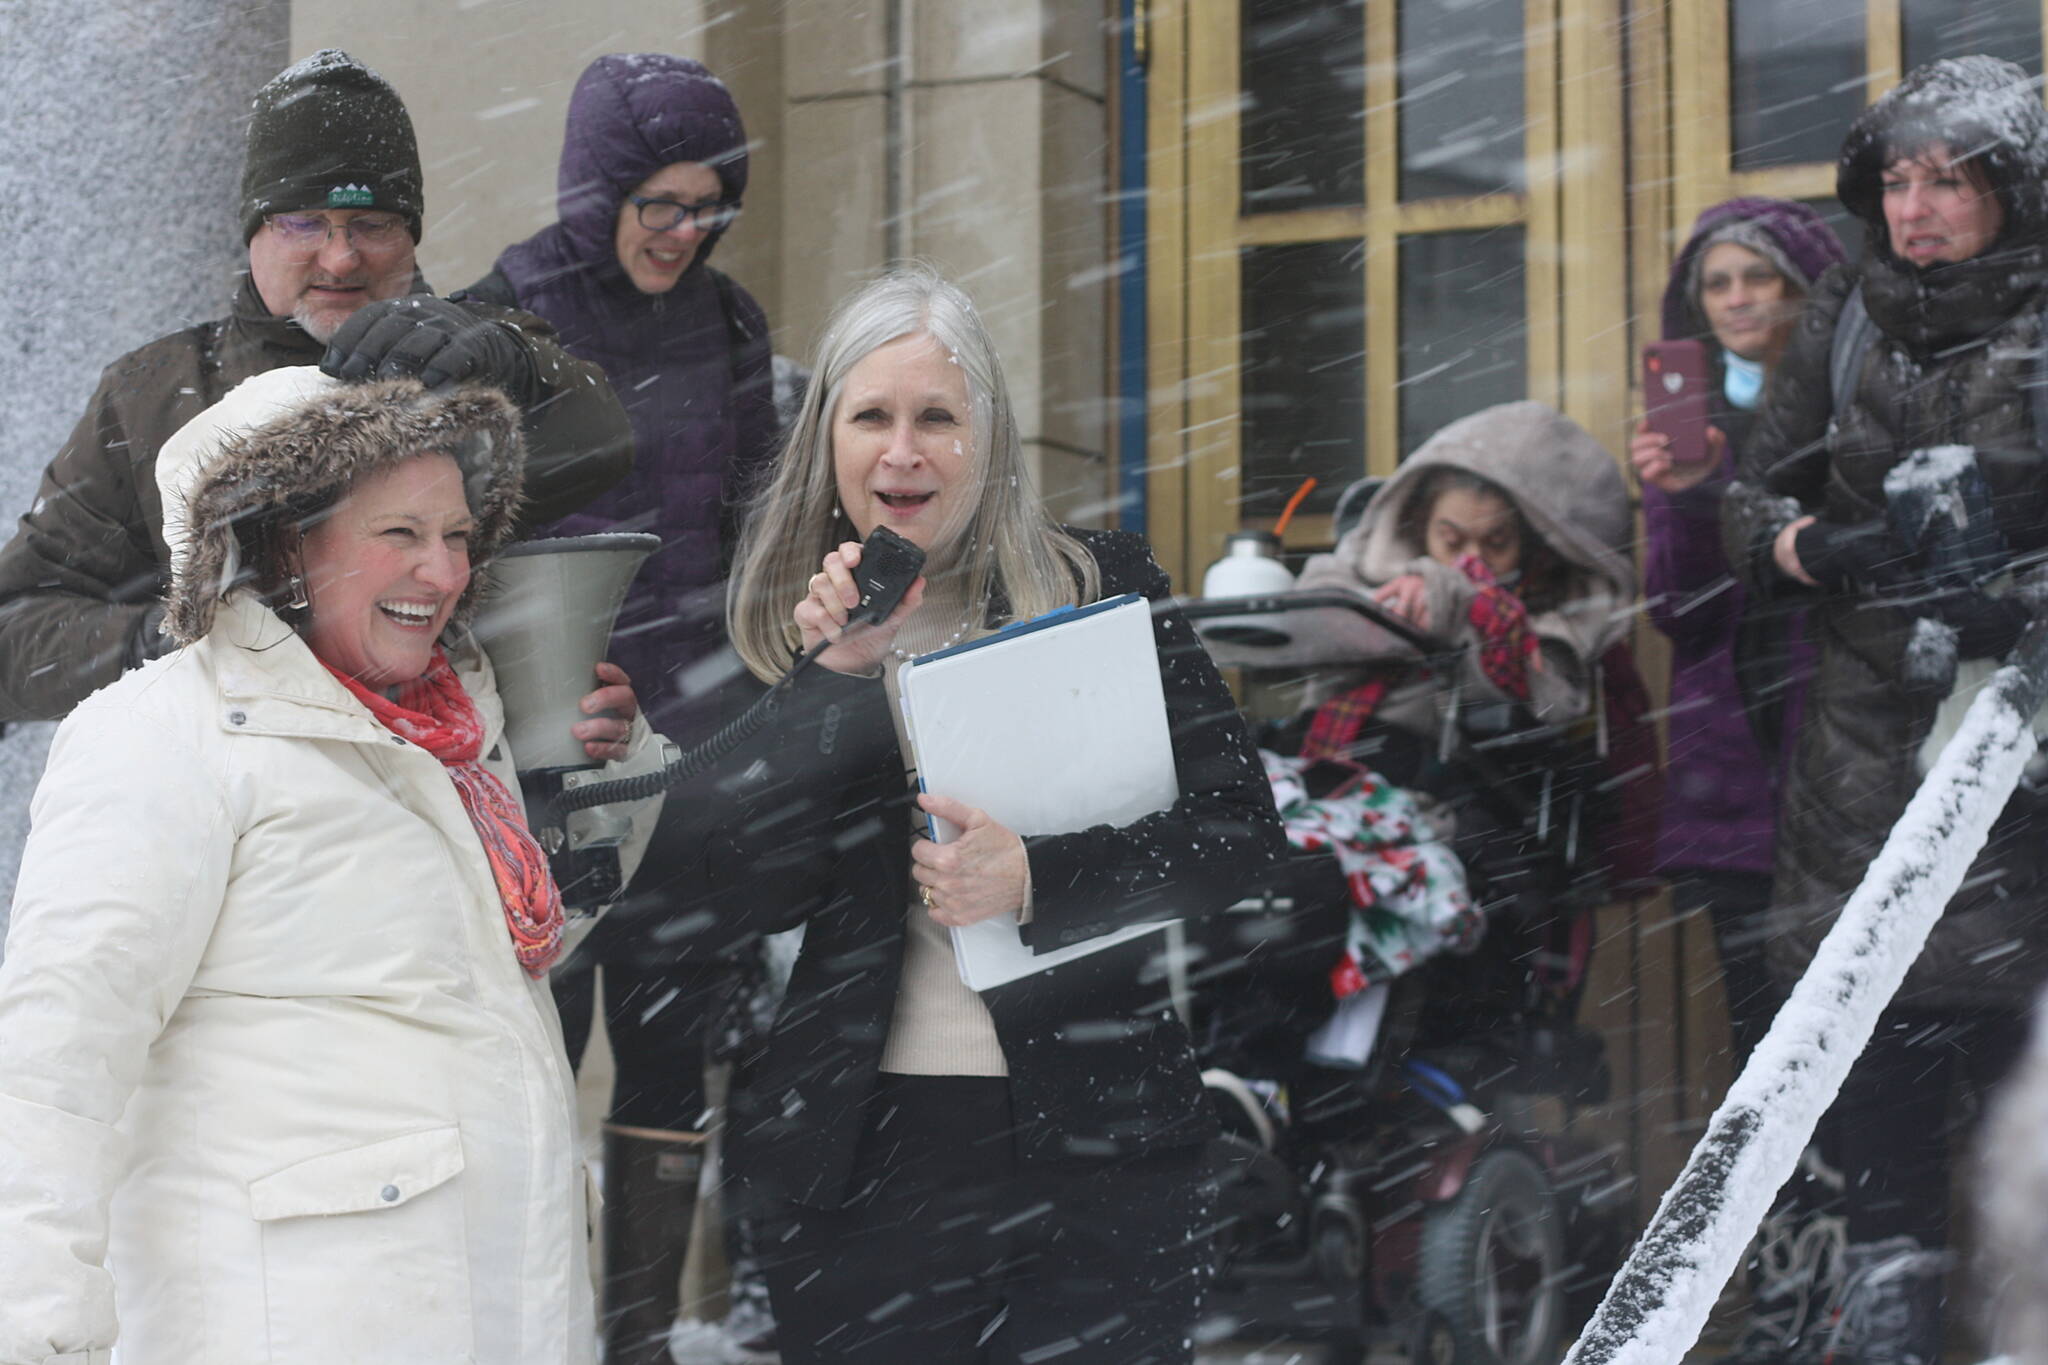 State Rep. Andi Story, D-Juneau, advocates for more state funding on behalf of Alaska residents with disabilities so they can “live as independently as possible” with the help of service providers during a rally in a heavy snowstorm at midday Wednesday on the steps of the Alaska State Capitol. (Mark Sabbatini / Juneau Empire)